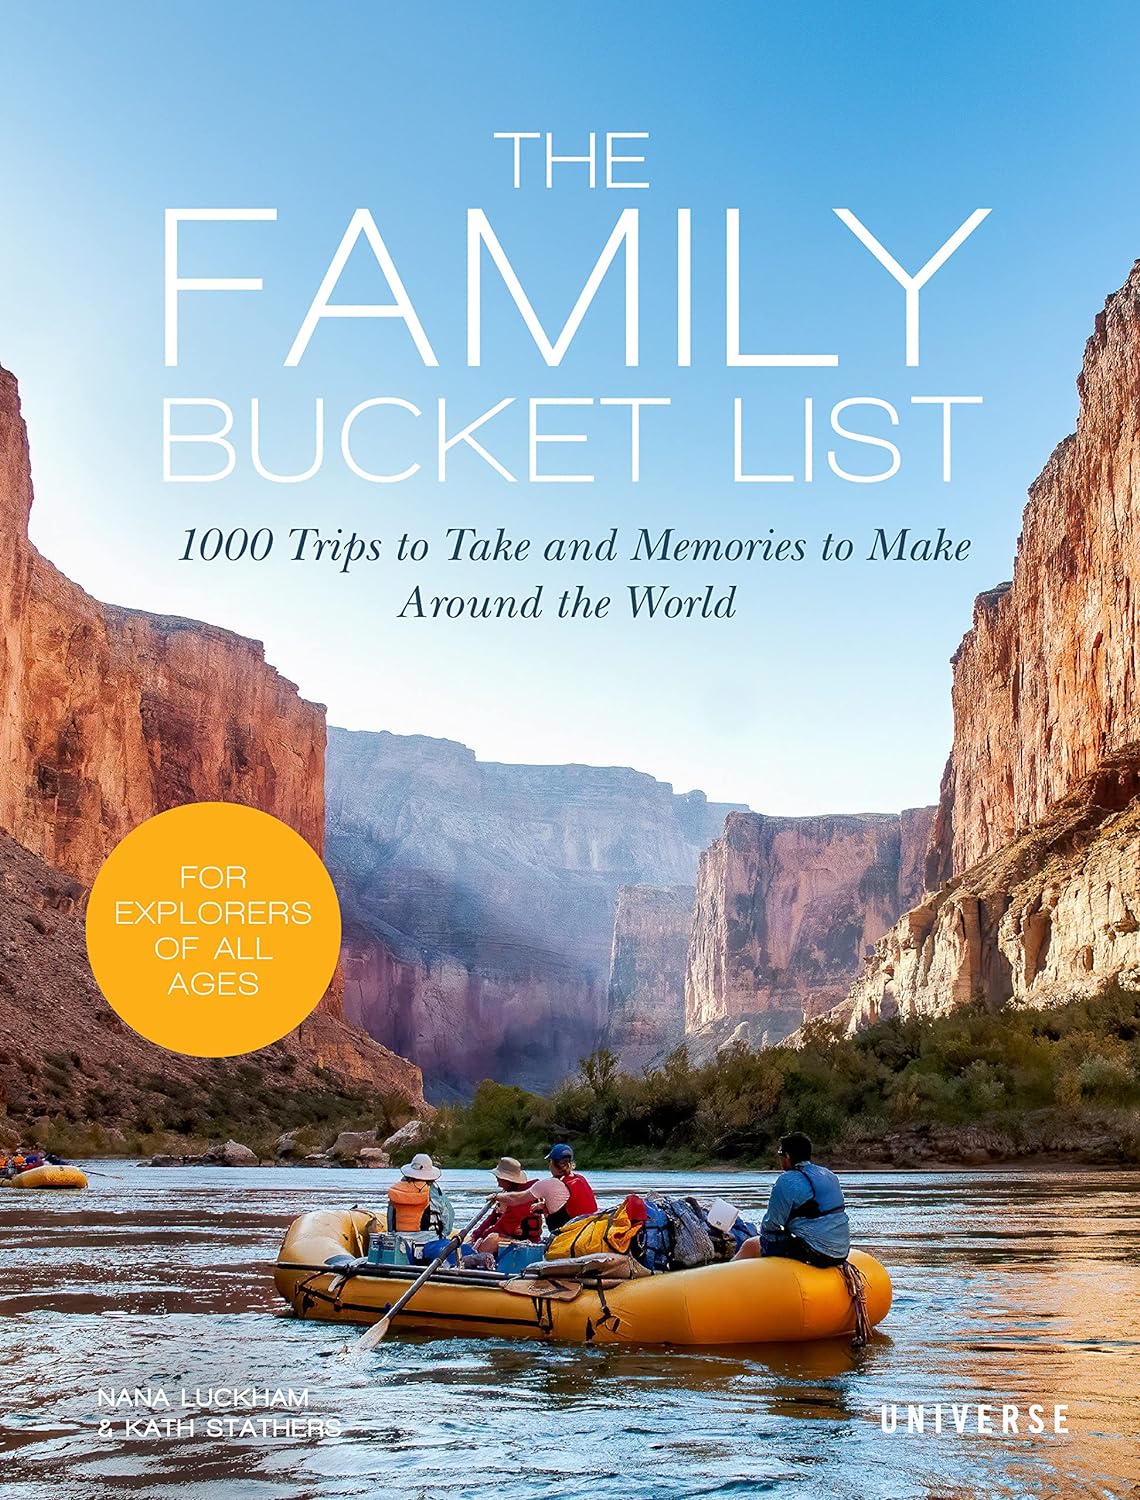 The Family Bucket List: 1,000 Trips to Take and Memories to Make Around the World